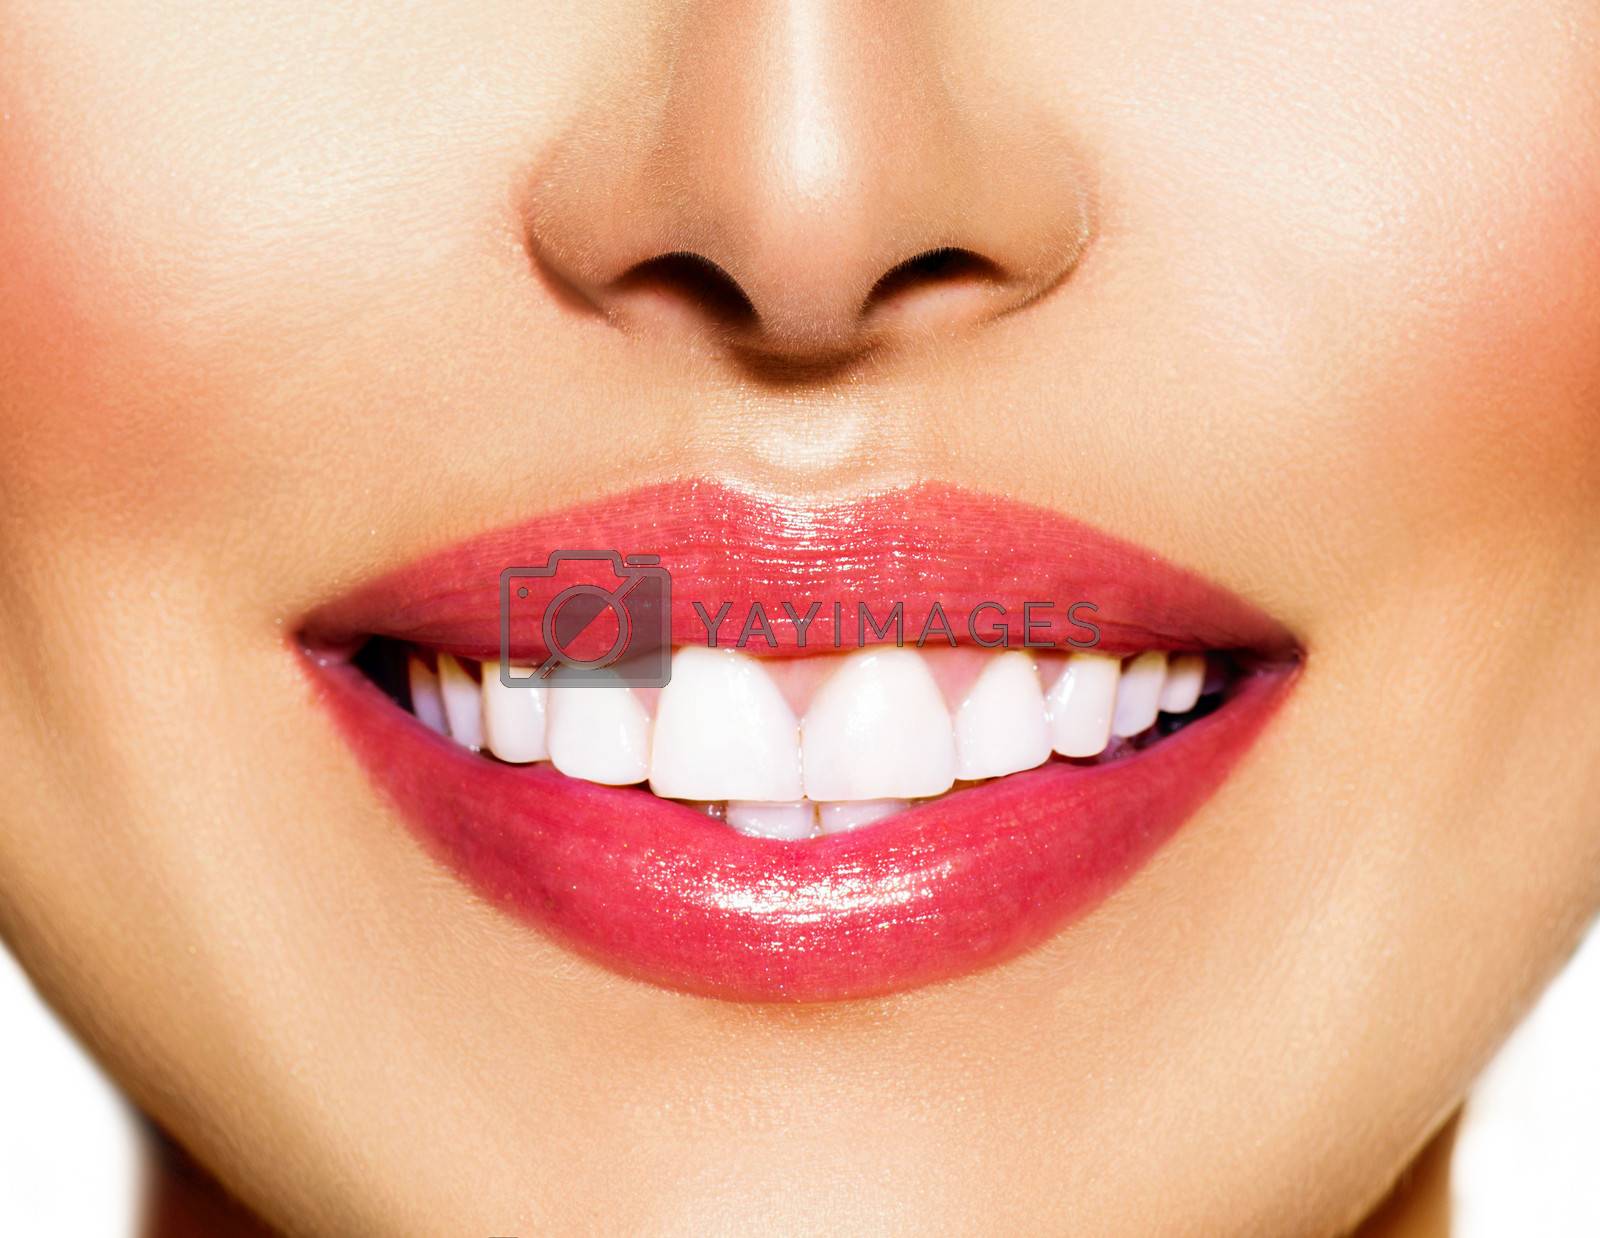 Royalty free image of Healthy Smile. Teeth Whitening. Dental Care Concept  by SubbotinaA